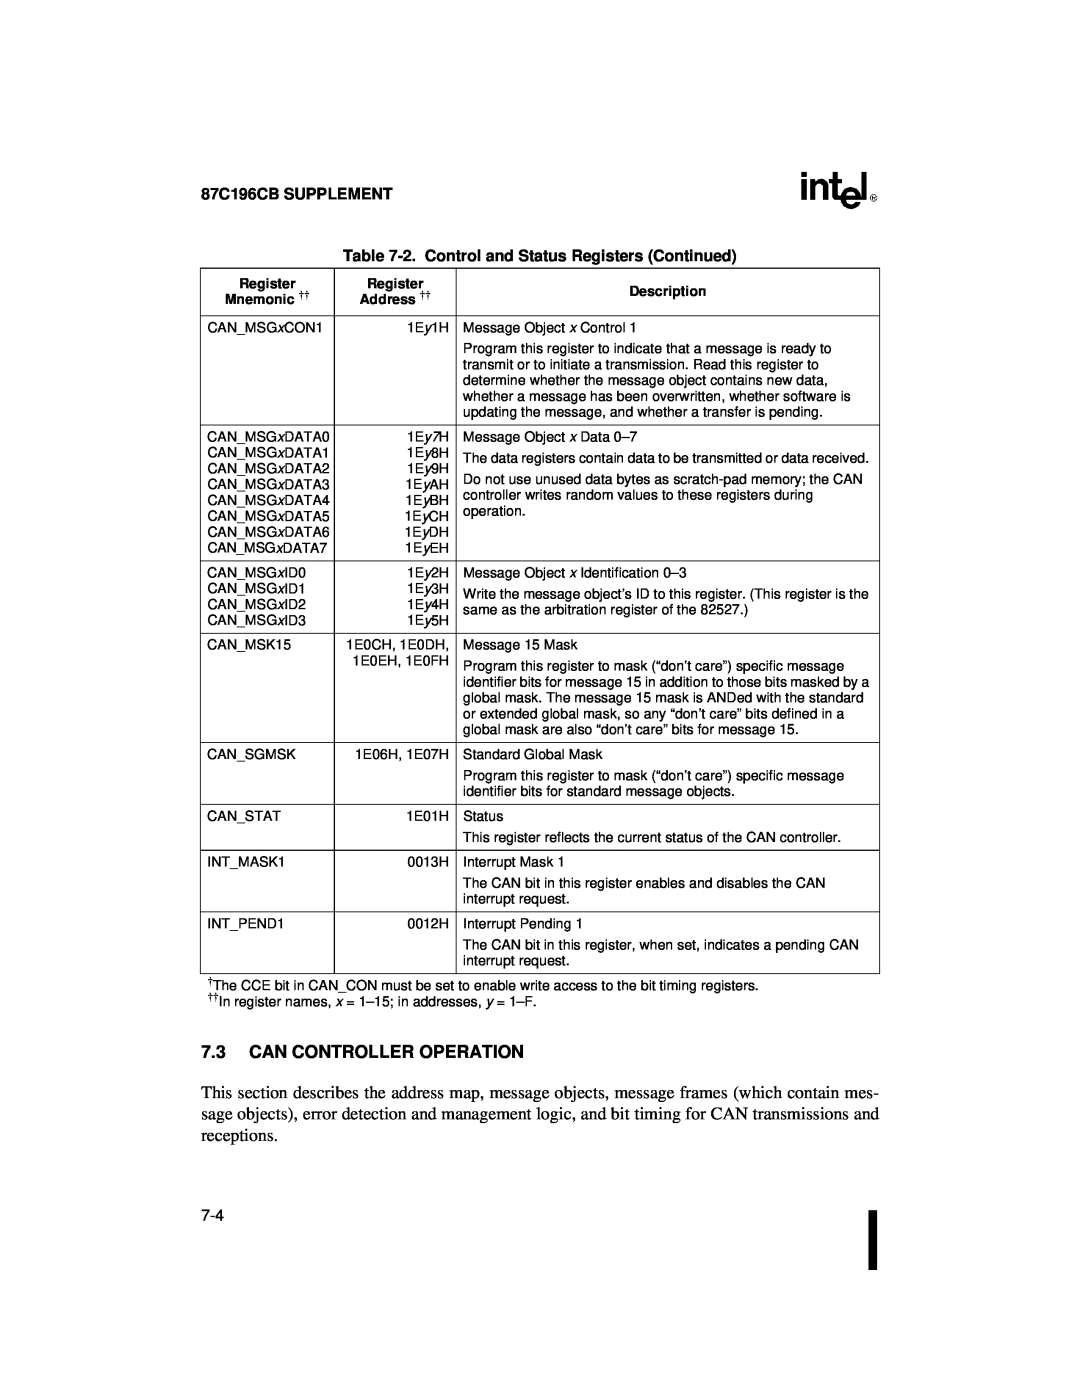 Intel 8XC196NT user manual Can Controller Operation, 87C196CB SUPPLEMENT -2. Control and Status Registers Continued 